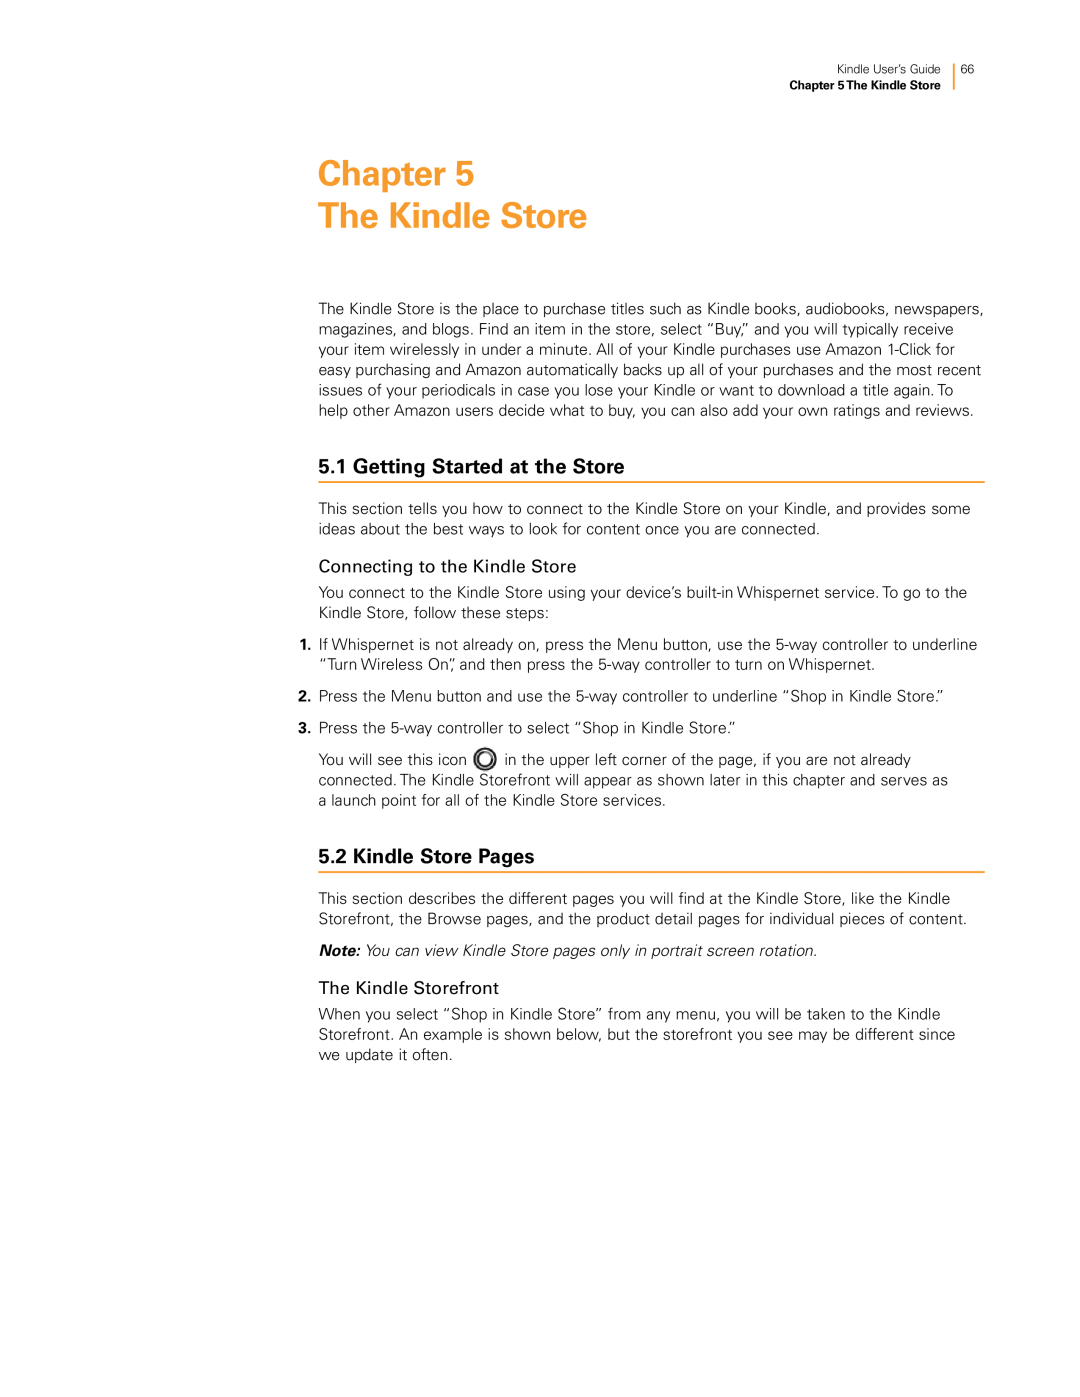 Amazon KNDKYBRD3G manual Chapter The Kindle Store, Getting Started at the Store, Kindle Store Pages, The Kindle Storefront 